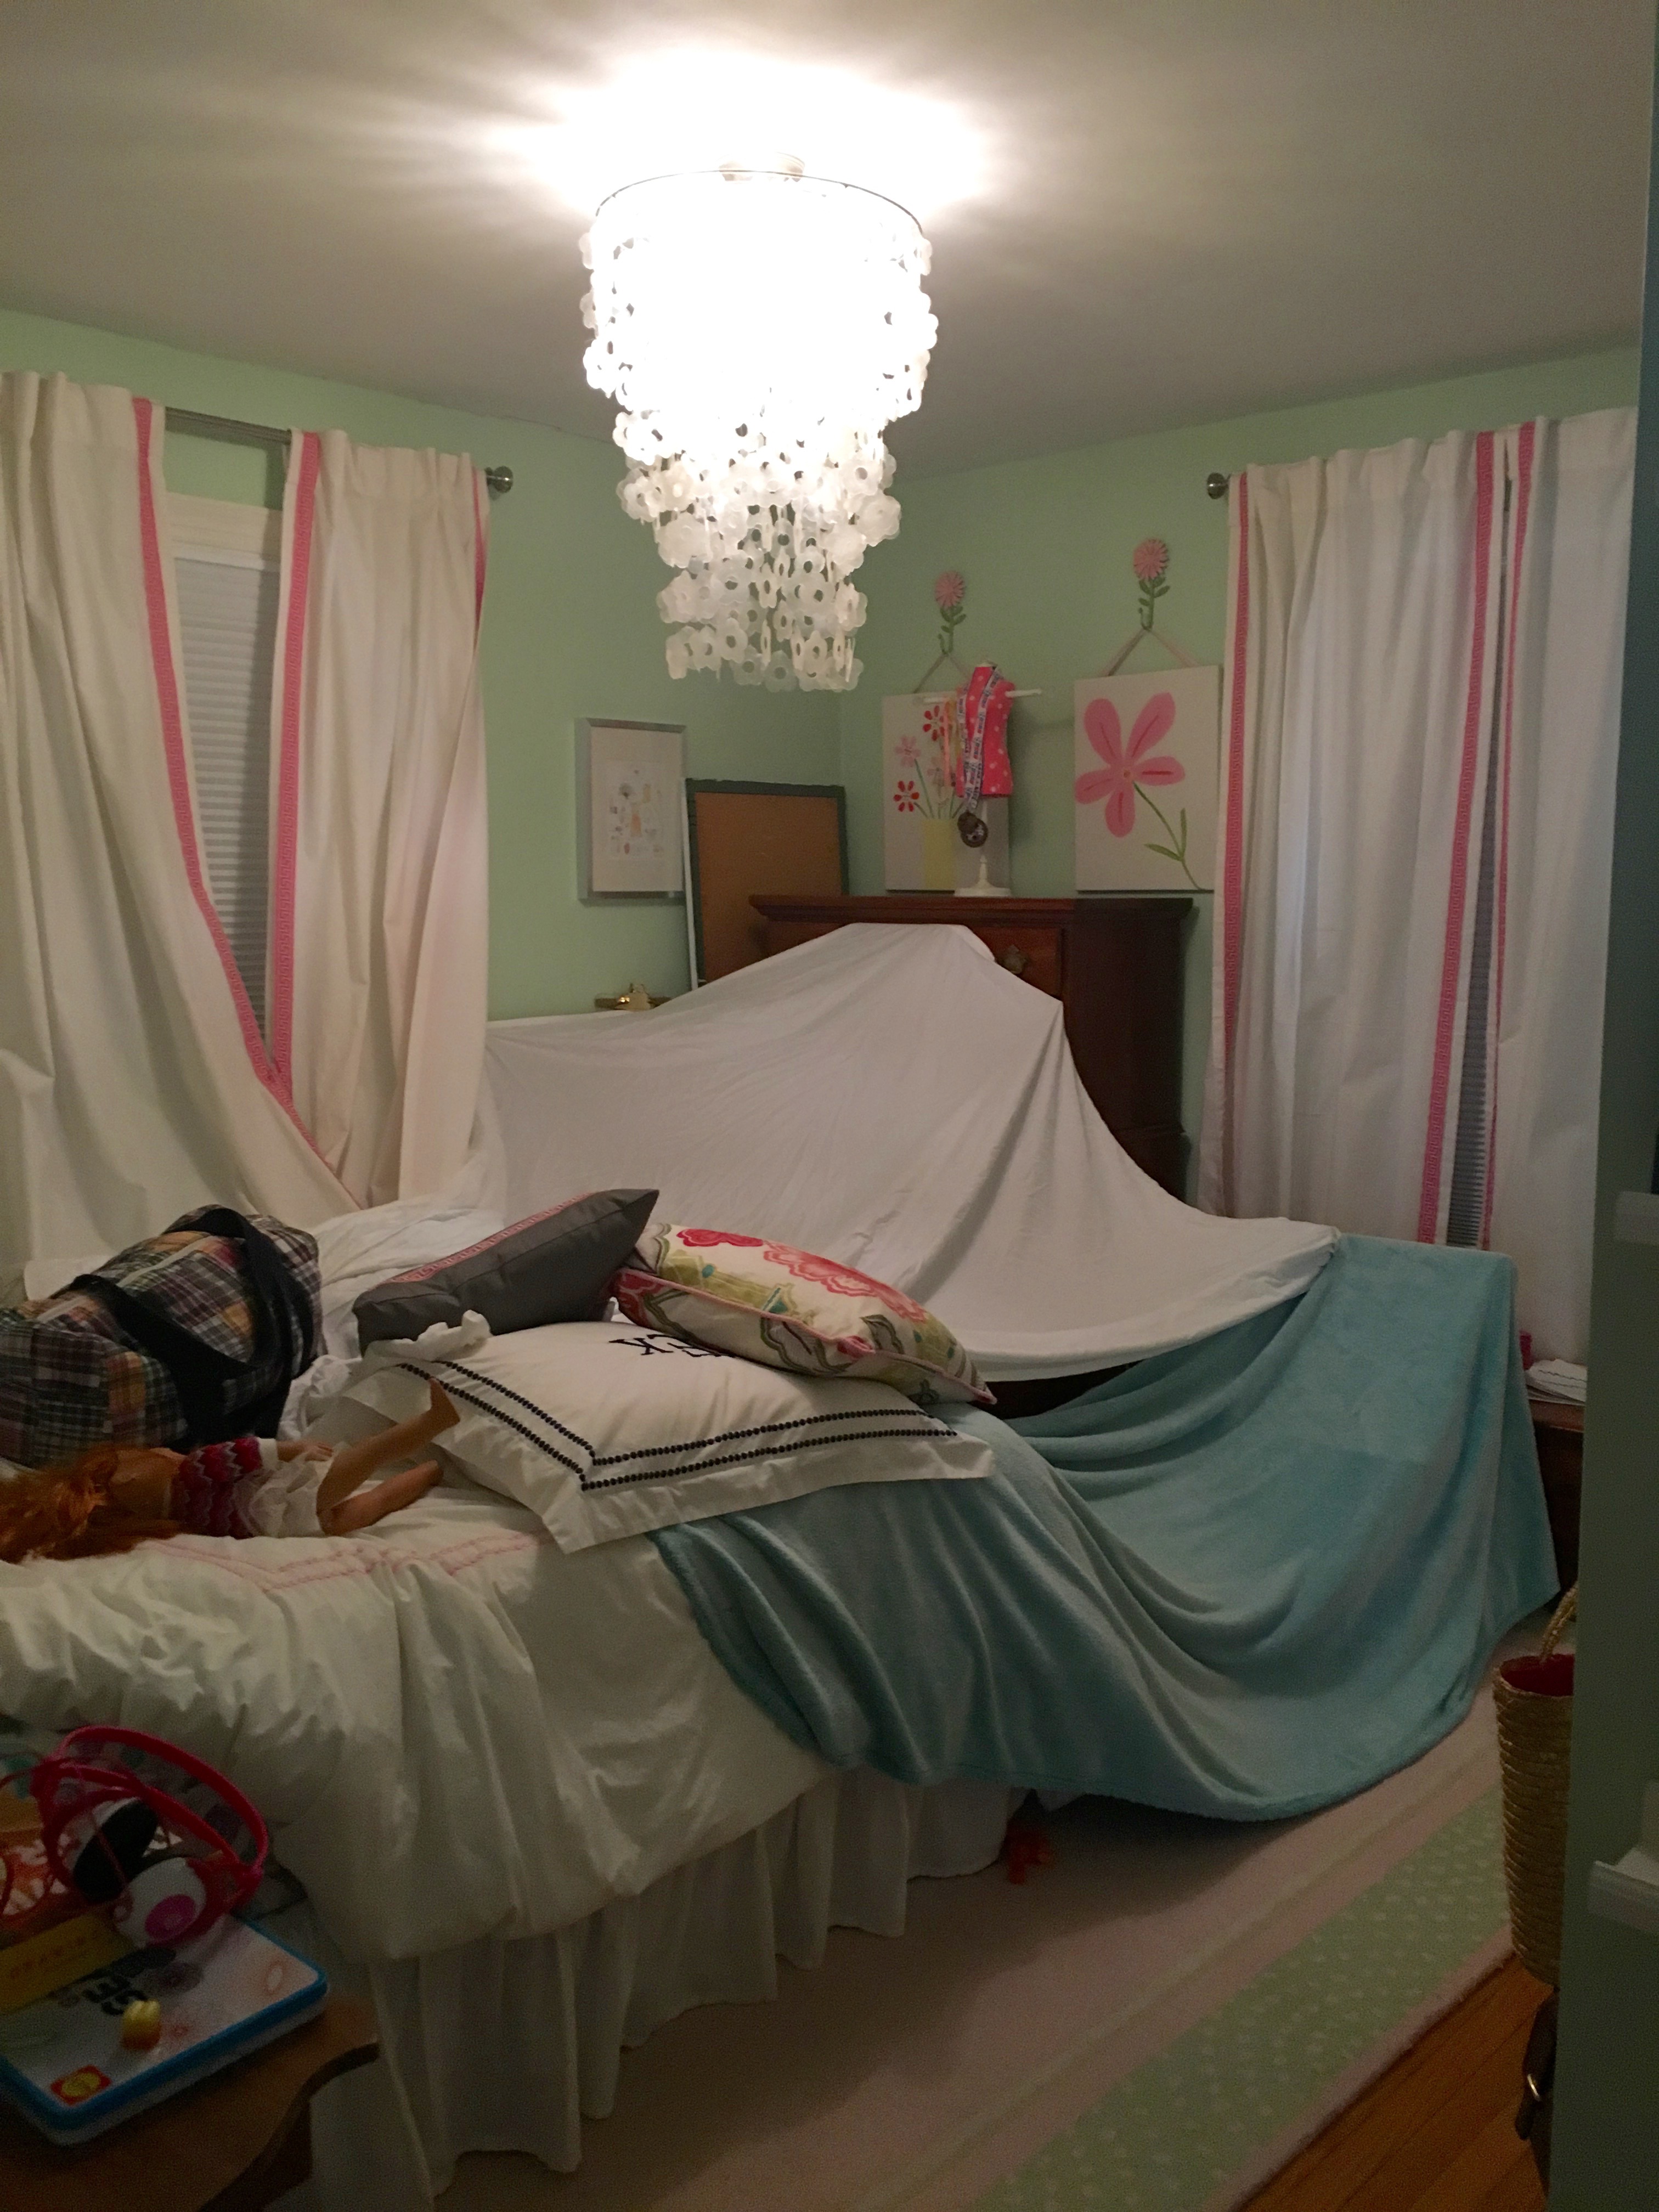 BEFORE- "More room for blanket forts and sleepovers Mom!"